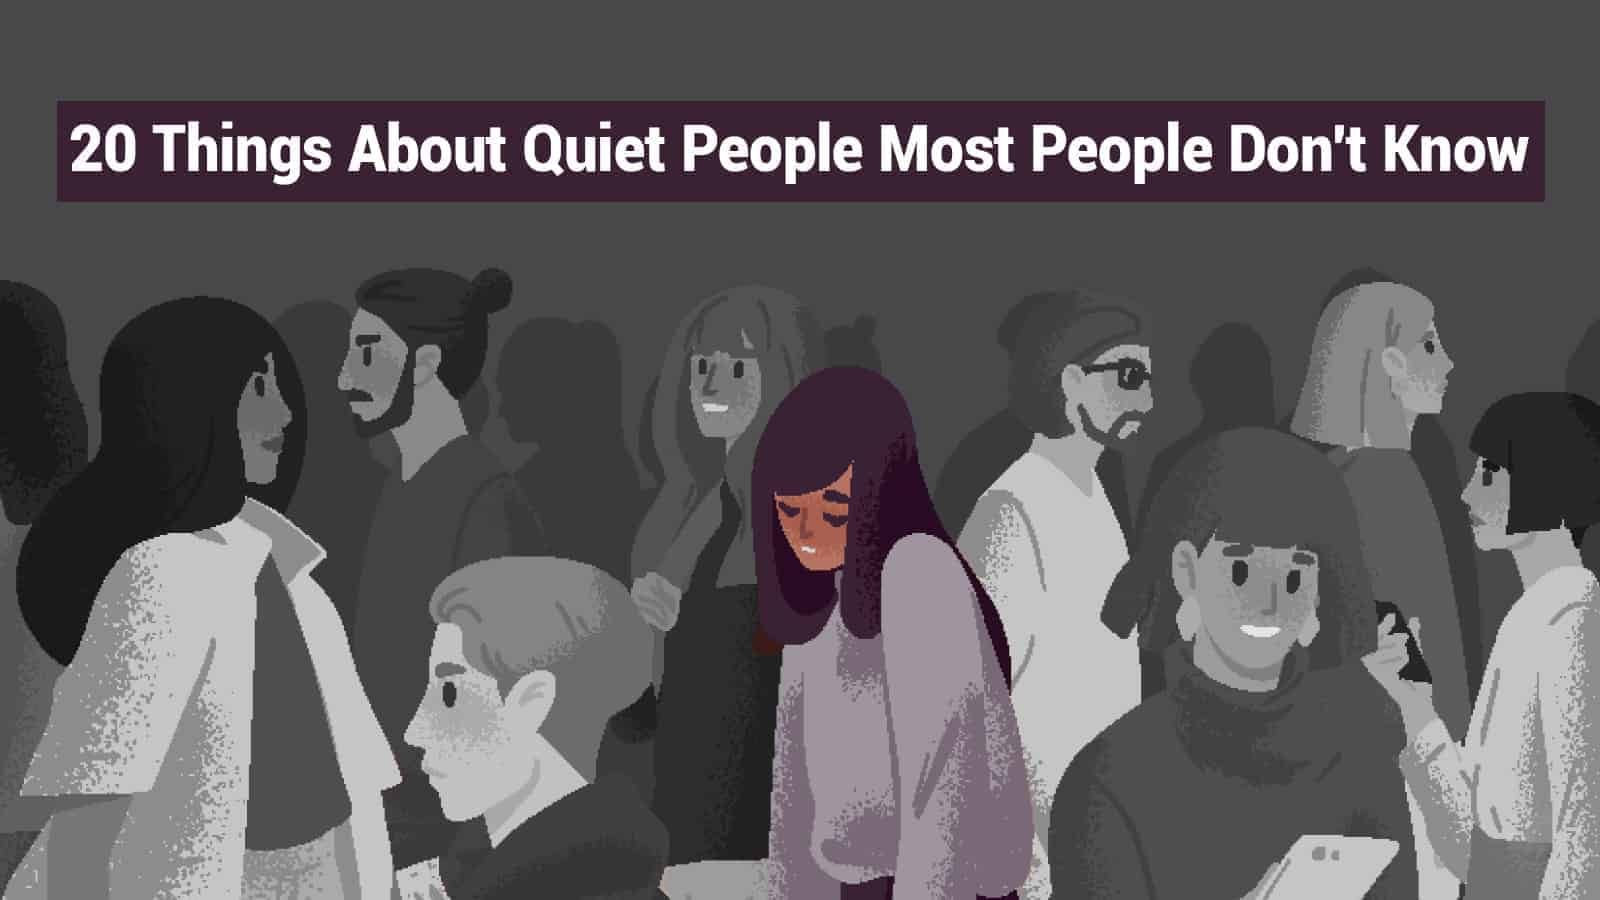 20 Things About Quiet People Most People Don’t Know